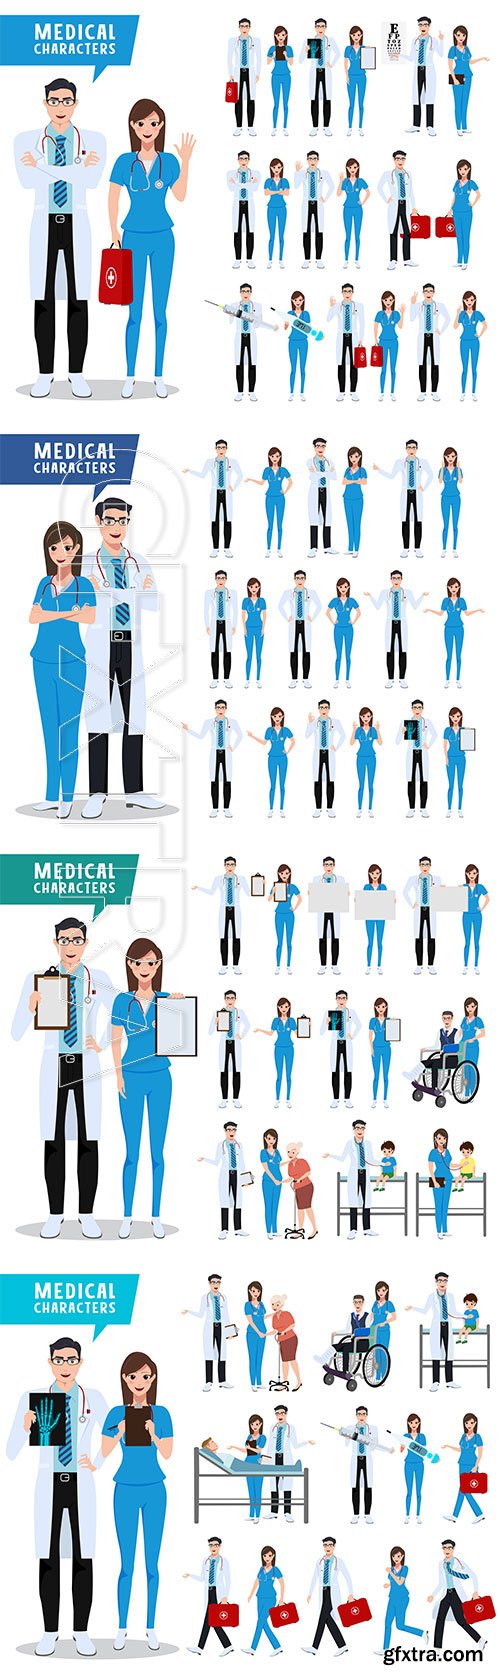 Medical characters vector illustration